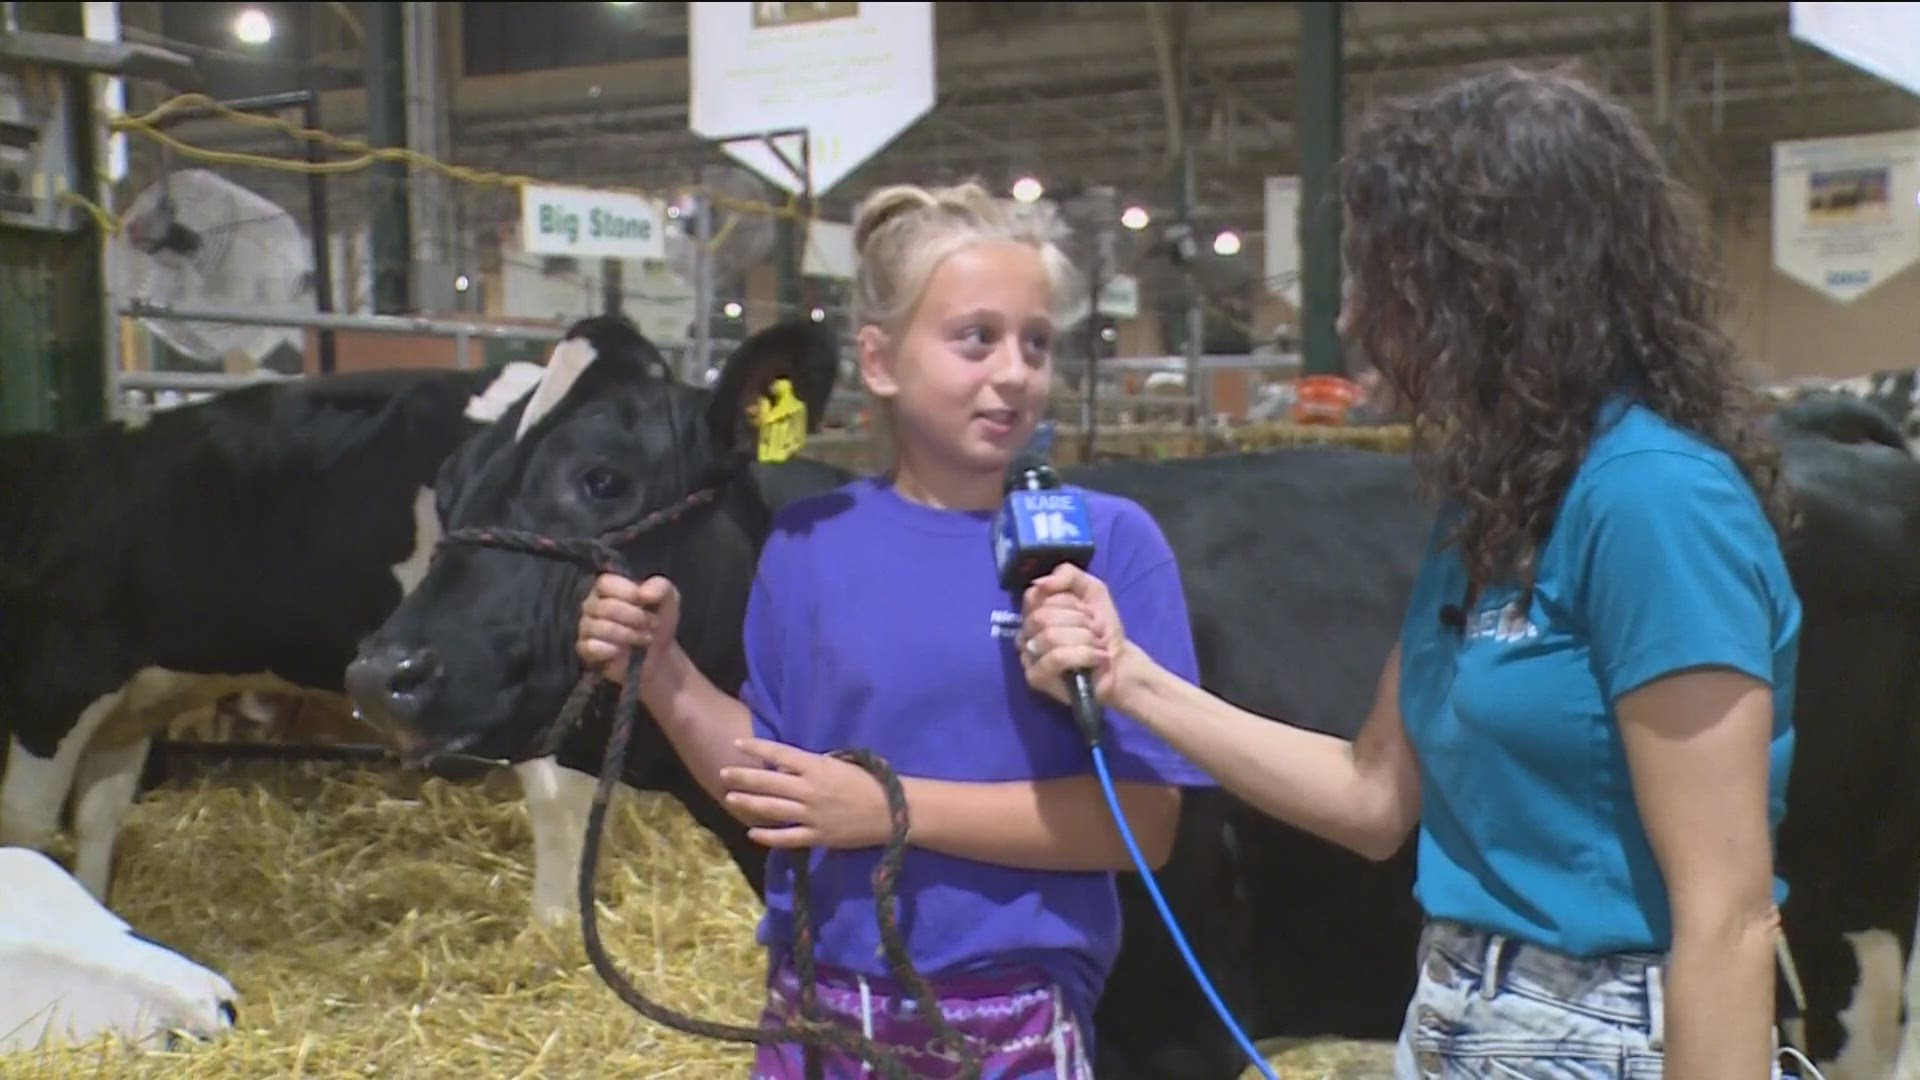 While many people think of food food food, the Minnesota State Fair has plenty of ag flavor too. Jillian is a 4H kid who is ready to show her little cow Annie.